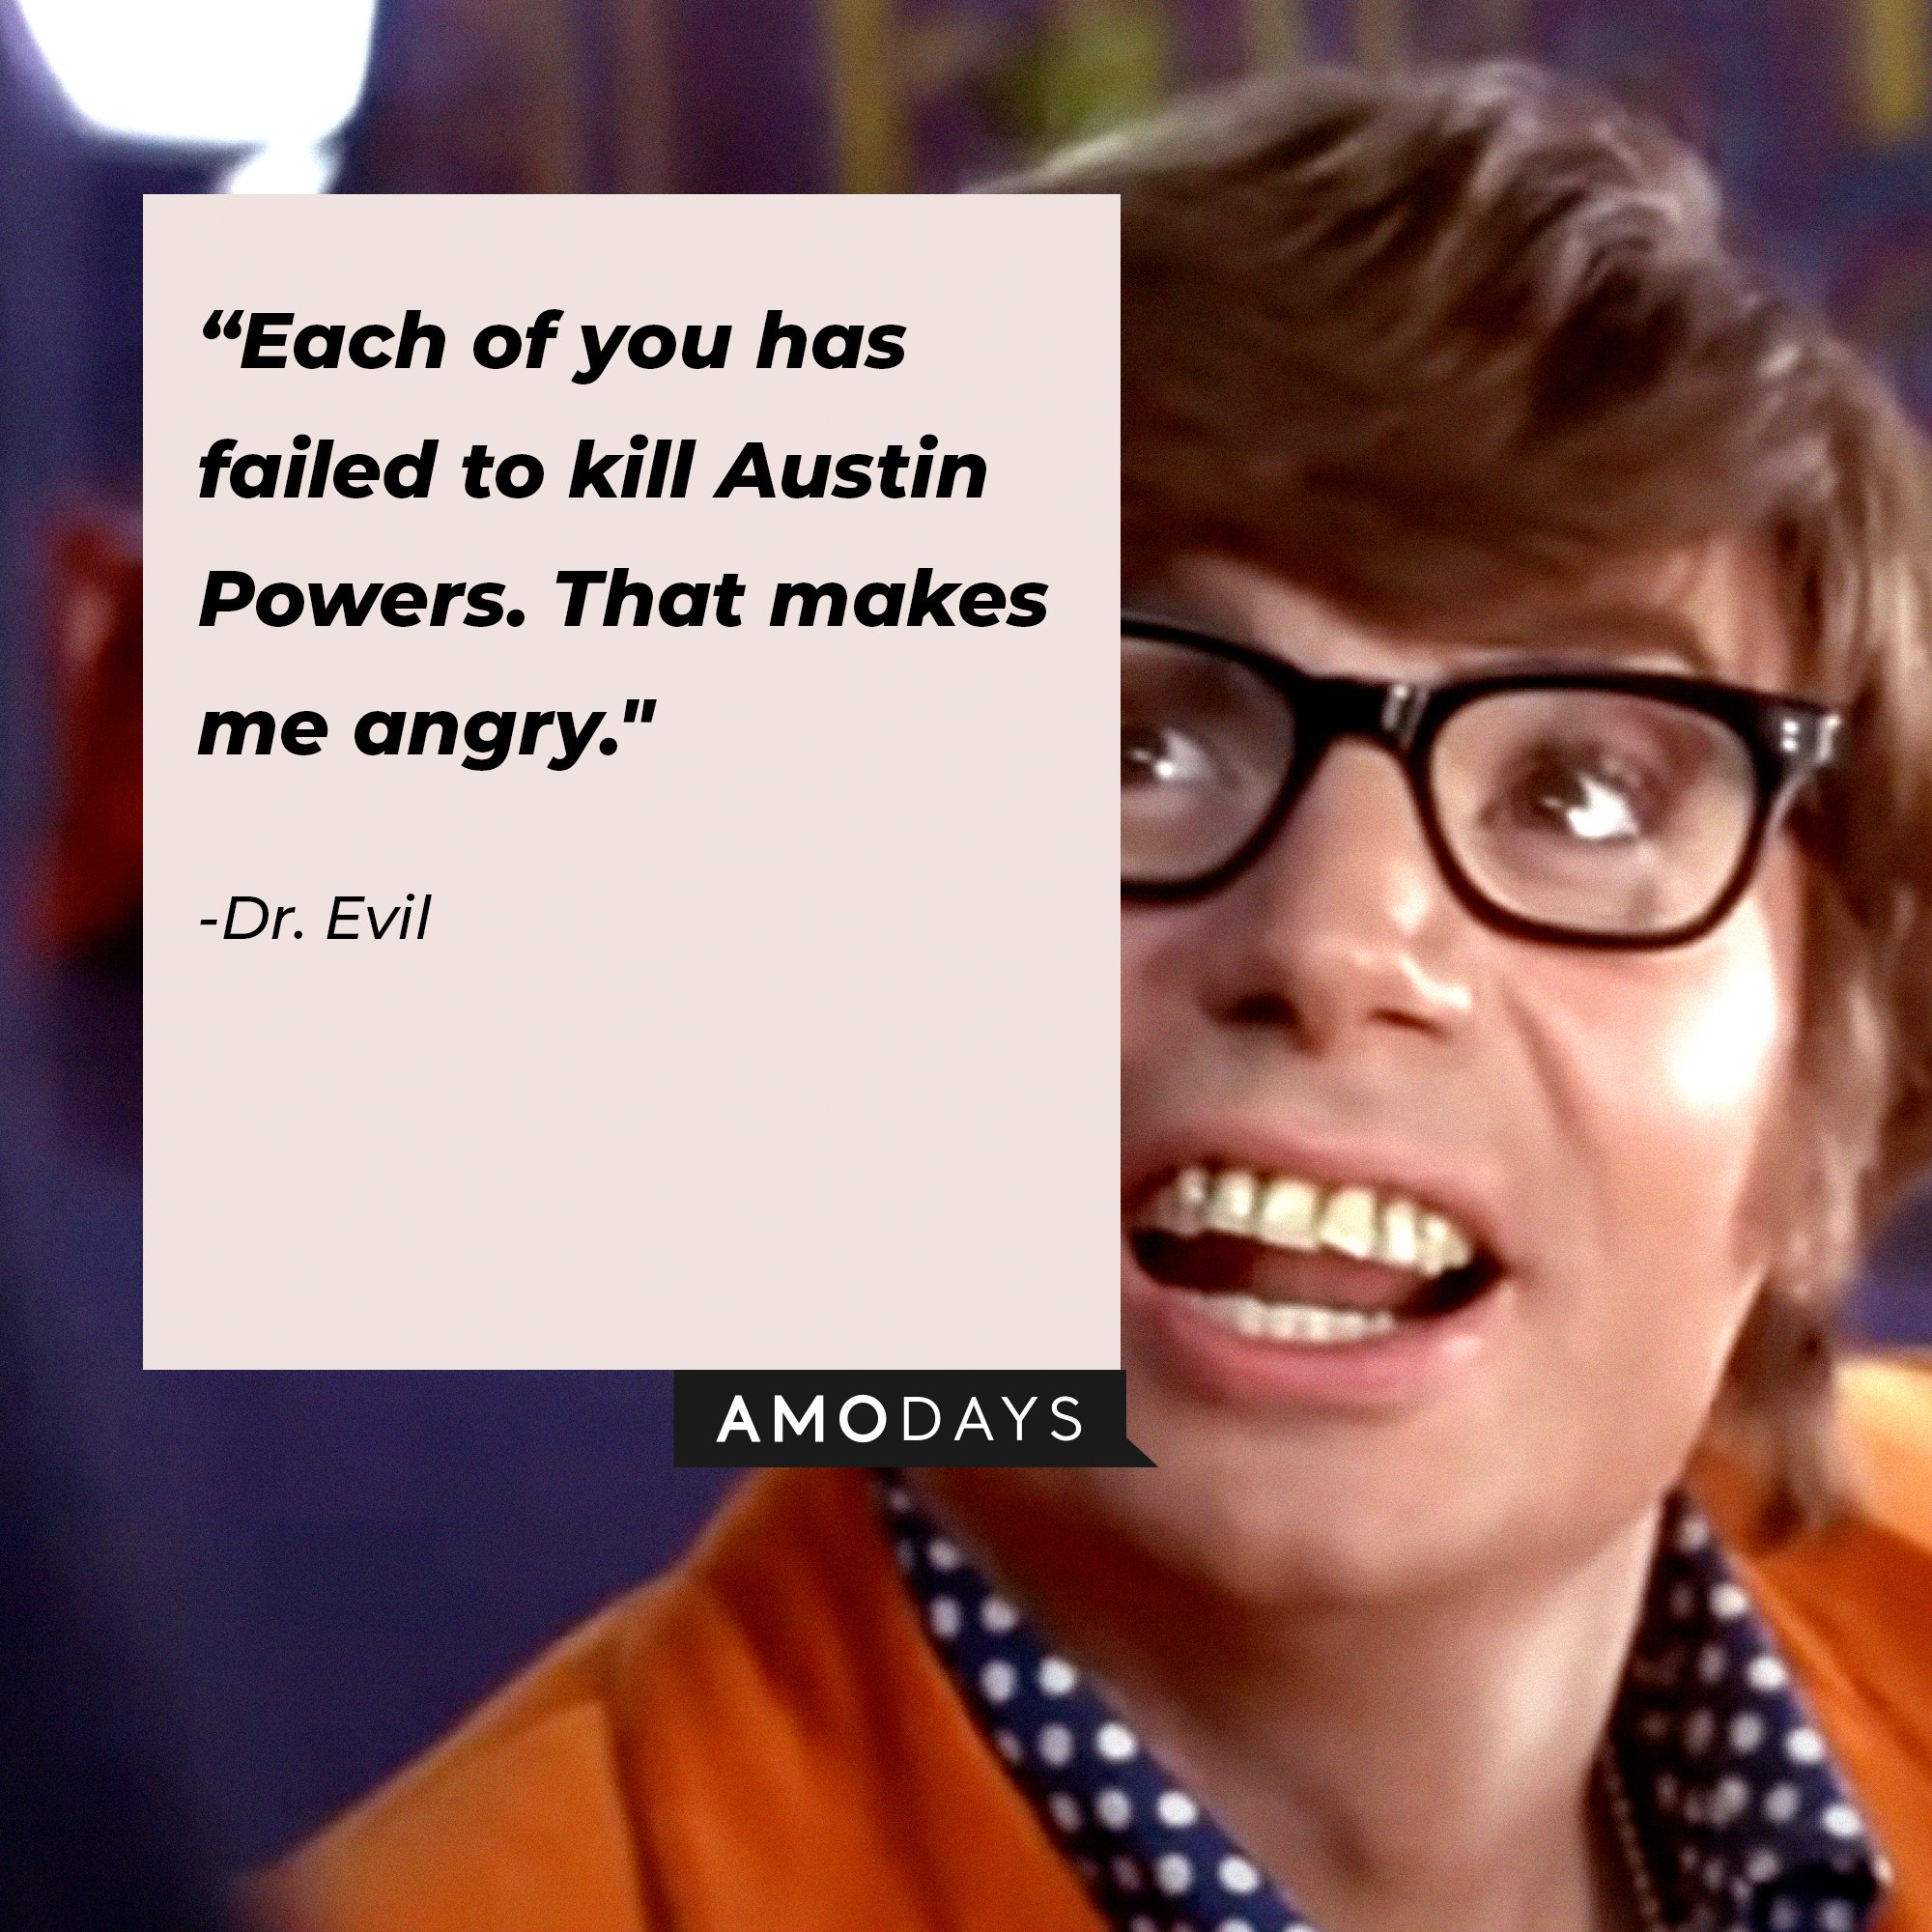  Dr. Evil’s quote: "Each of you has failed to kill Austin Powers. That makes me angry." | Image: Amodays